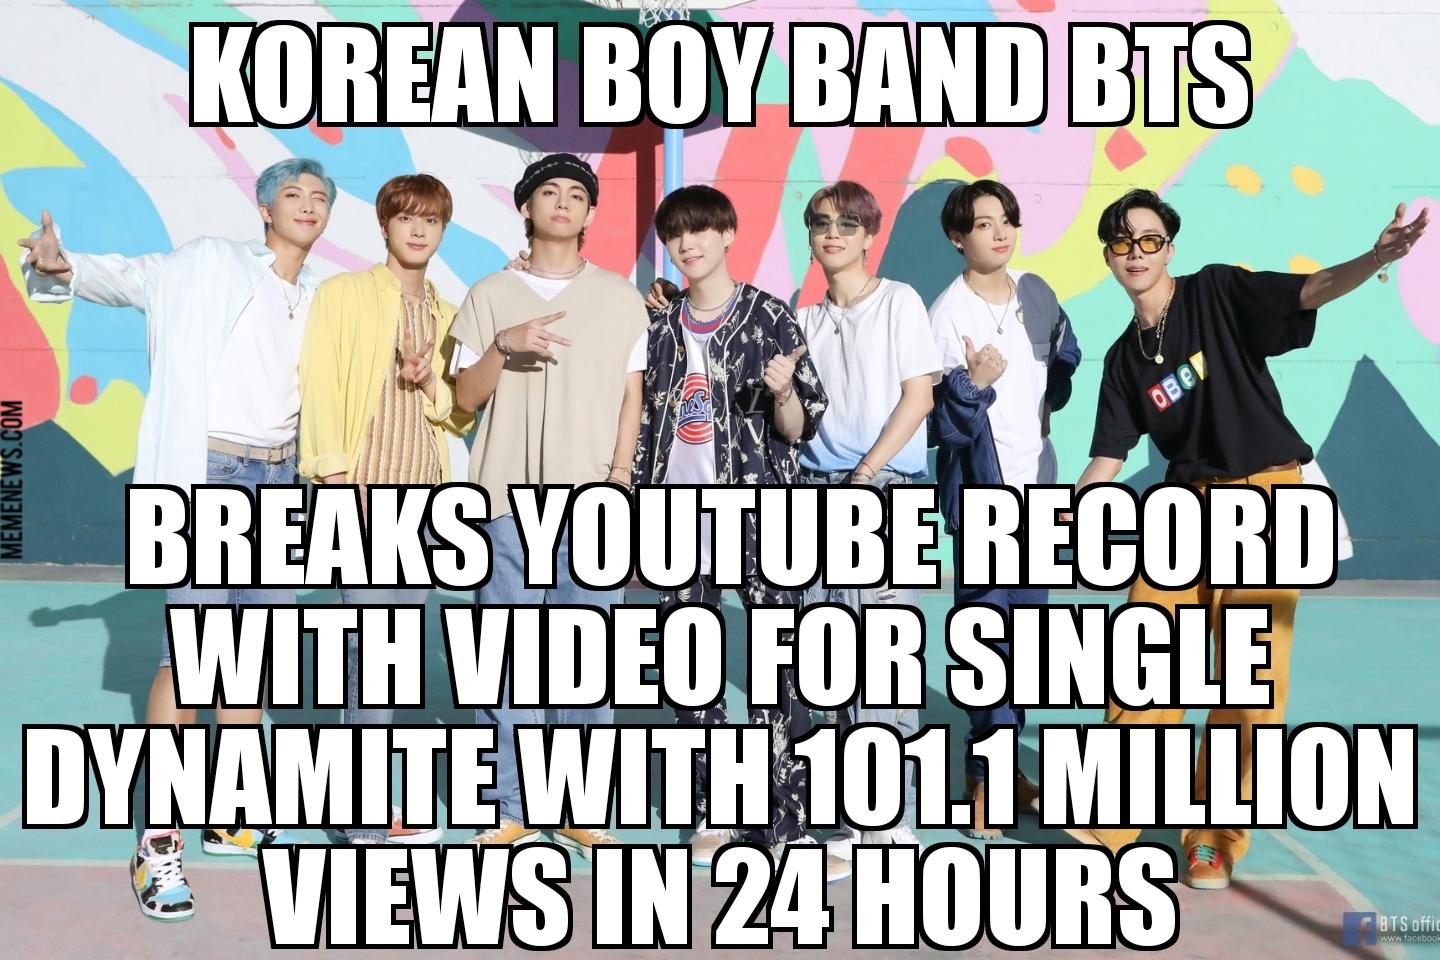 BTS breaks YouTube record with Dynamite